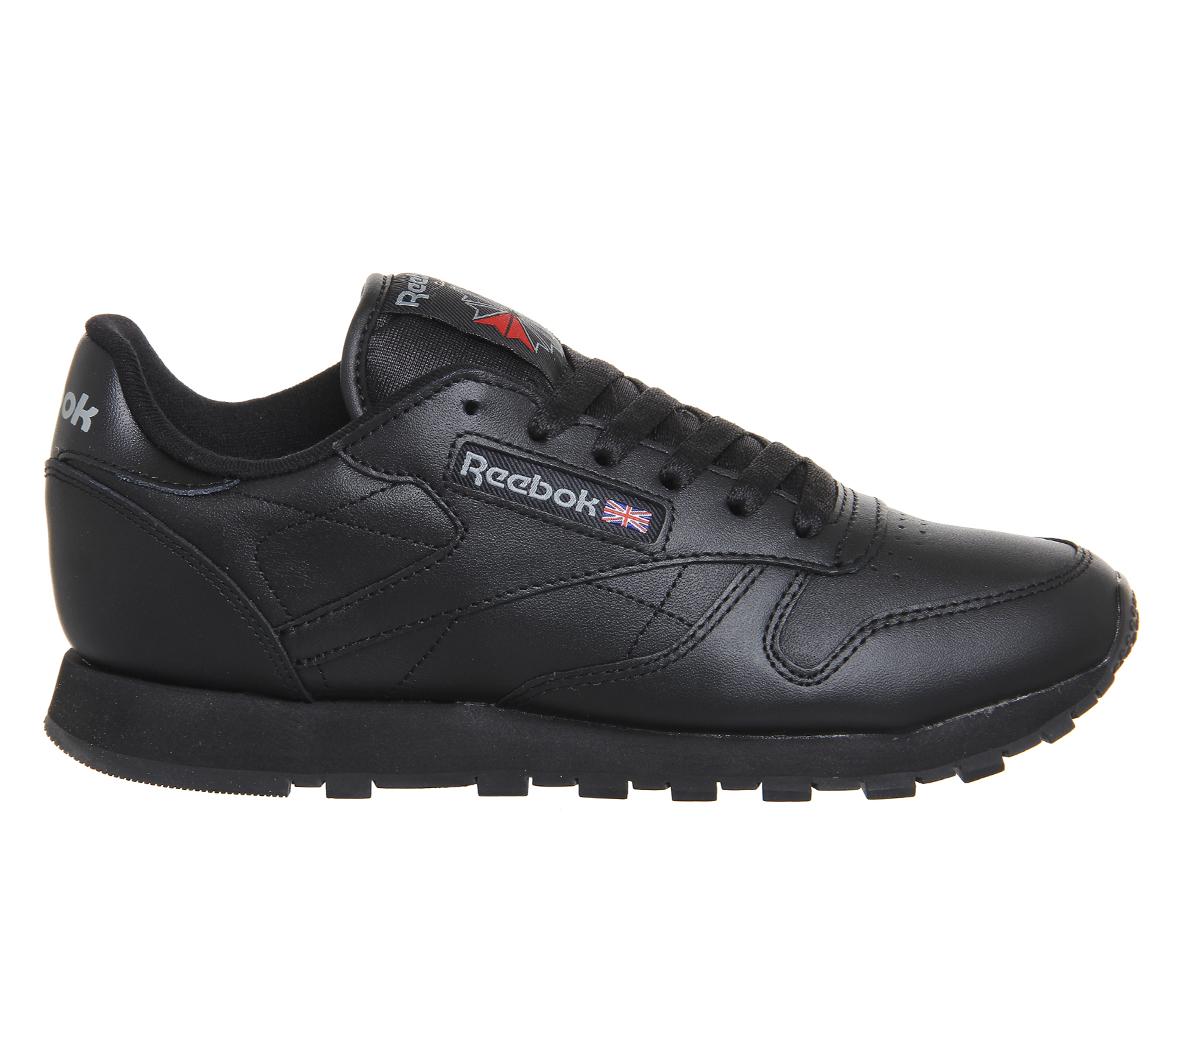 Reebok Classic Leather Trainers Black Leather - Office Girl